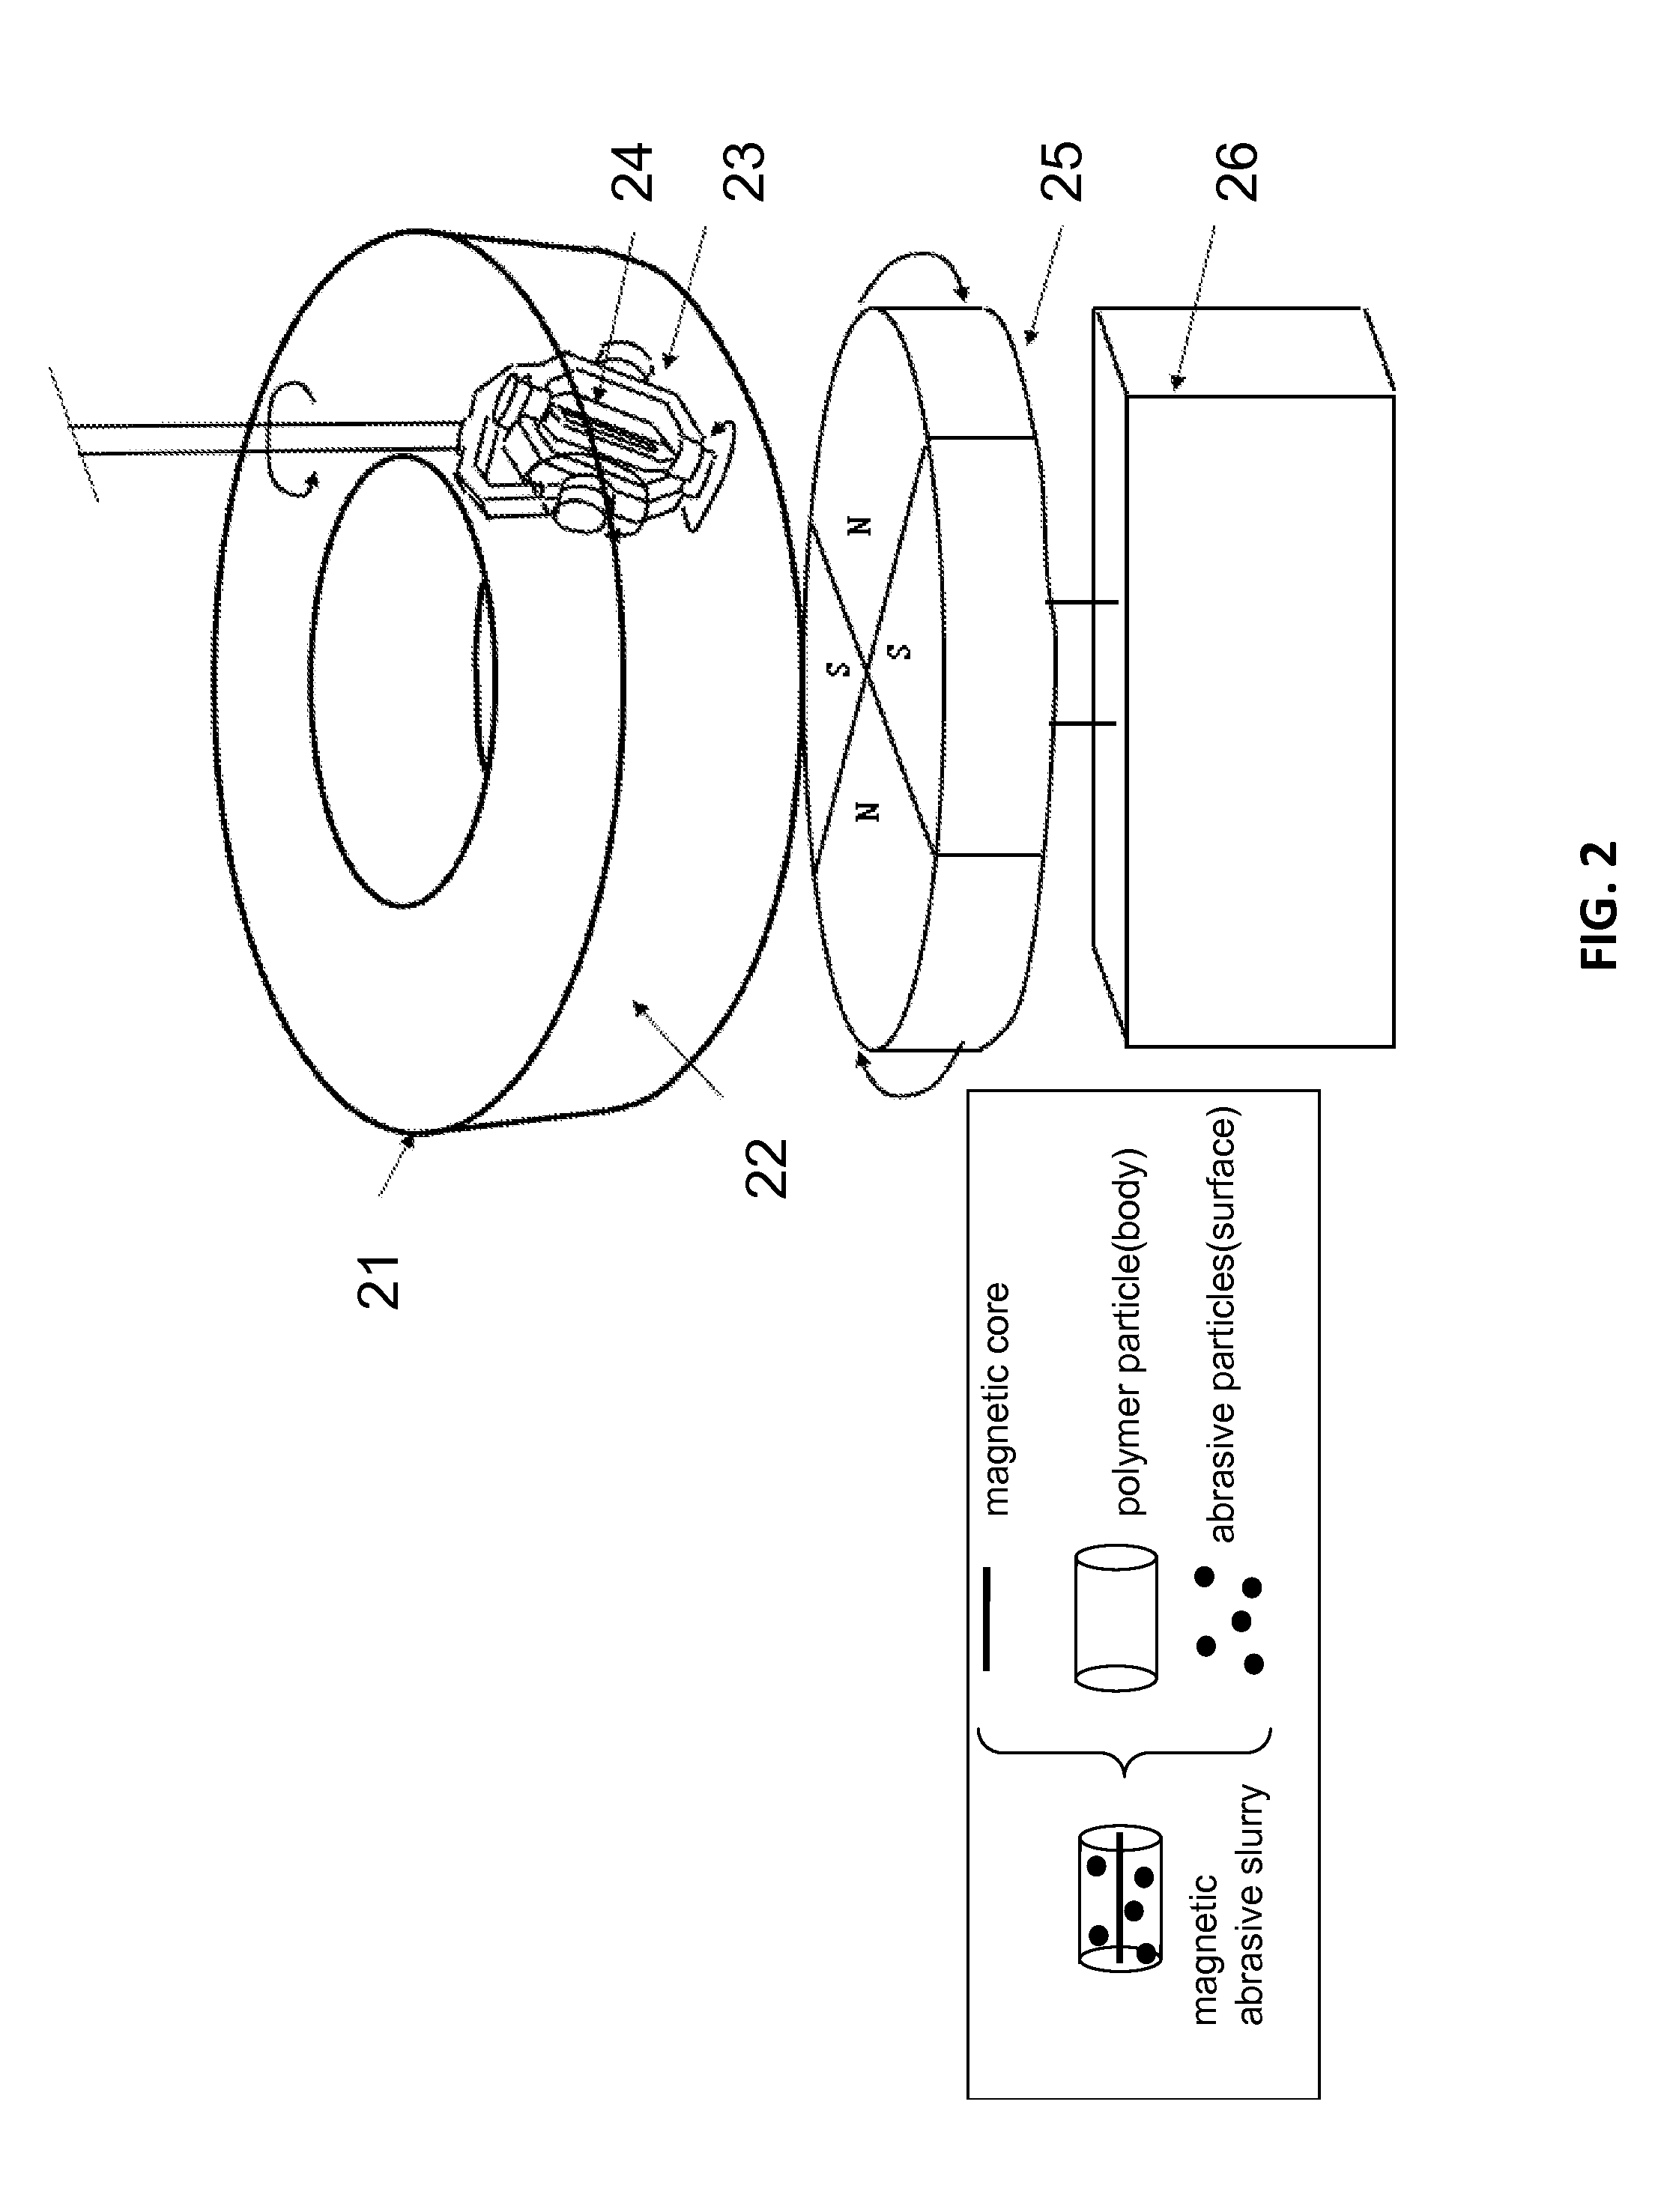 Automatic polishing device for surface finishing of complex-curved-profile parts